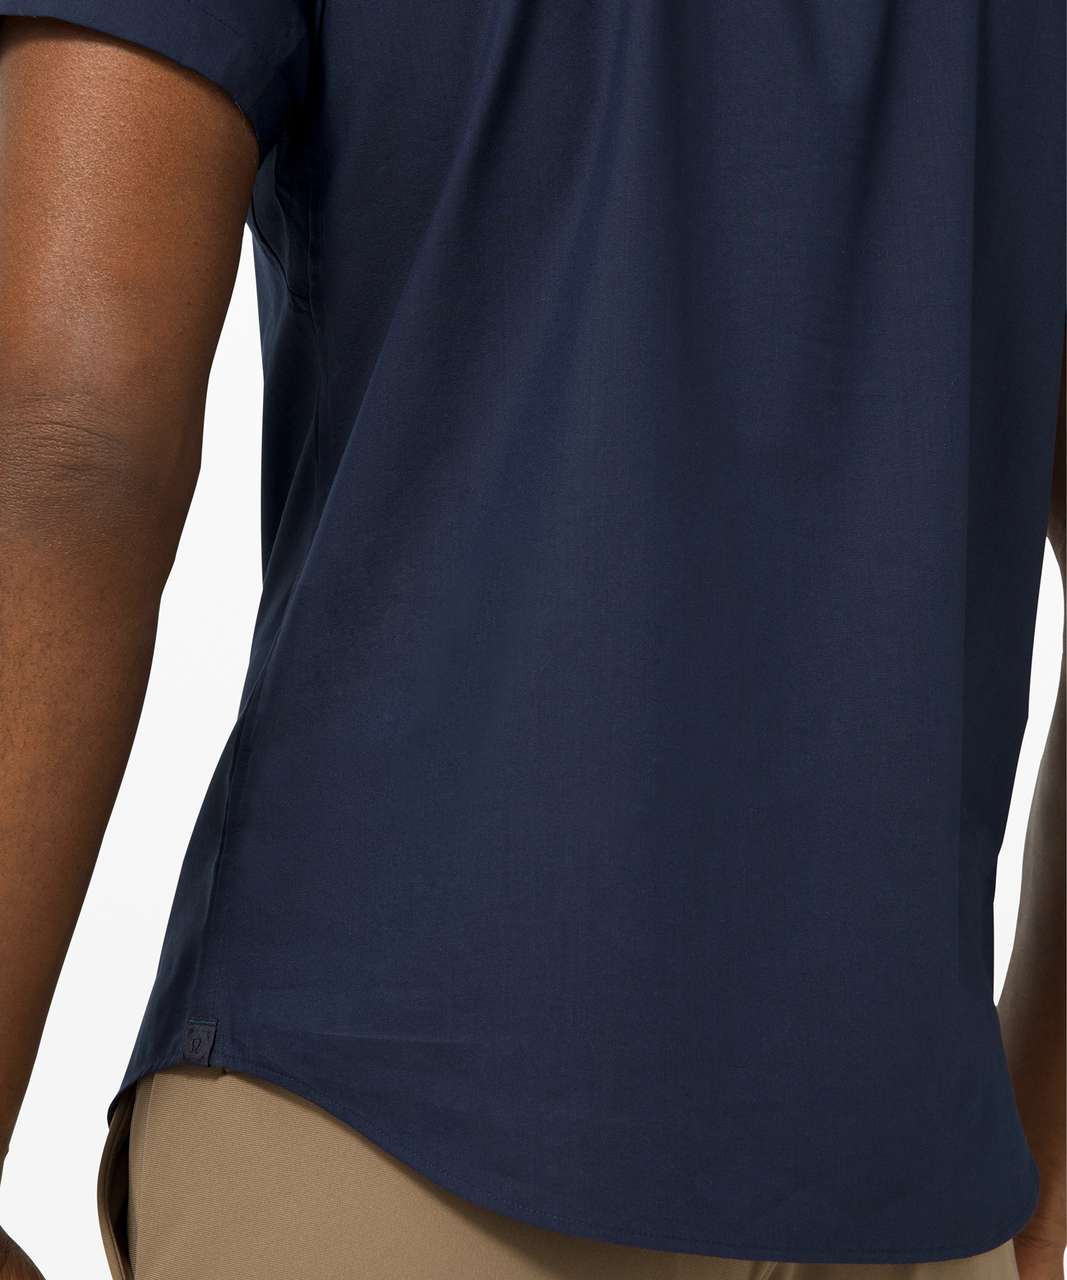 Lululemon Down to the Wire Slim Fit Short Sleeve - True Navy